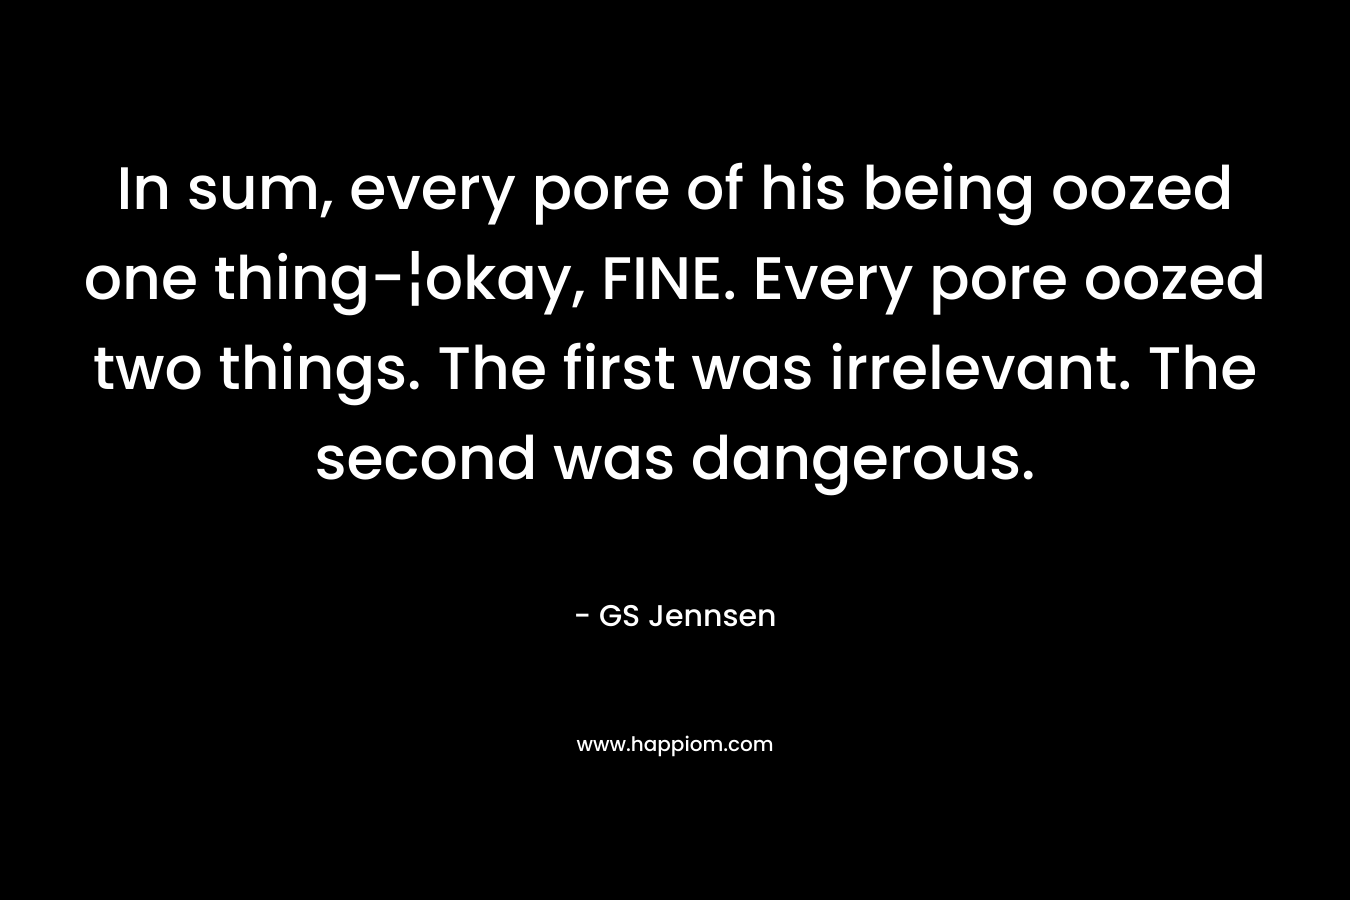 In sum, every pore of his being oozed one thing-¦okay, FINE. Every pore oozed two things. The first was irrelevant. The second was dangerous. – GS Jennsen